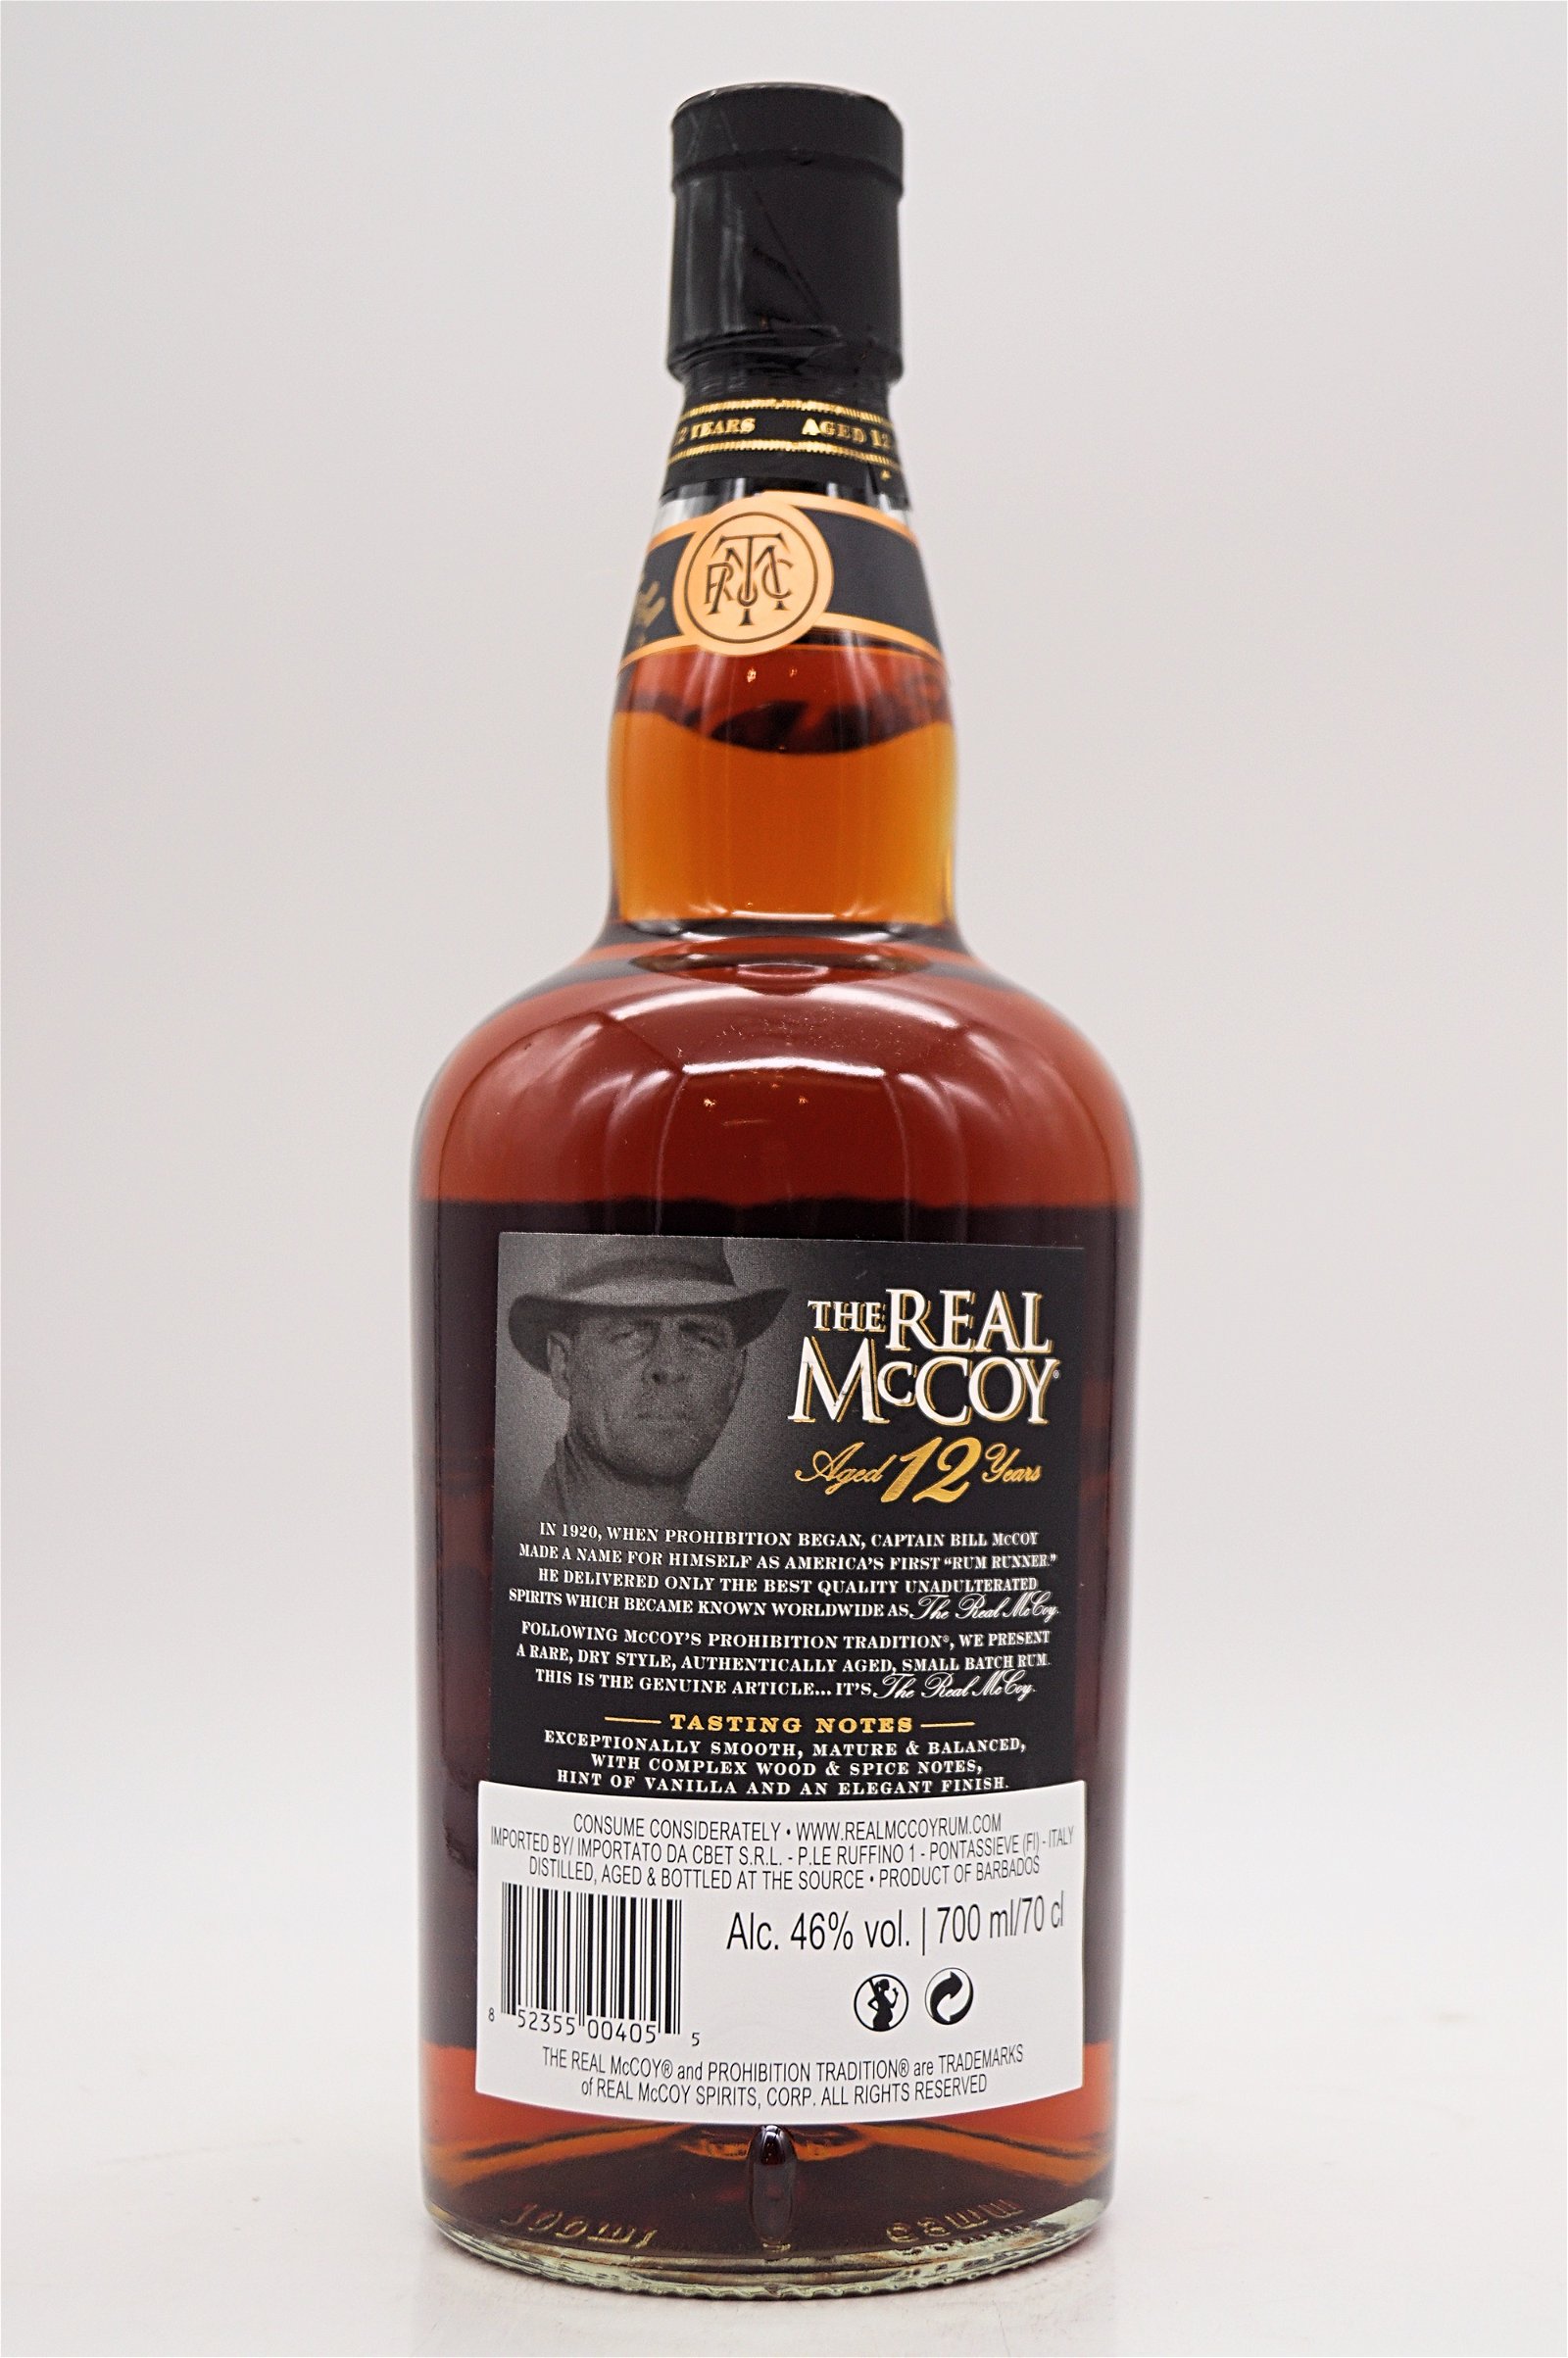 The Real Mc Coy 12 Jahre Distillers Proof Single Blended Rum 46%